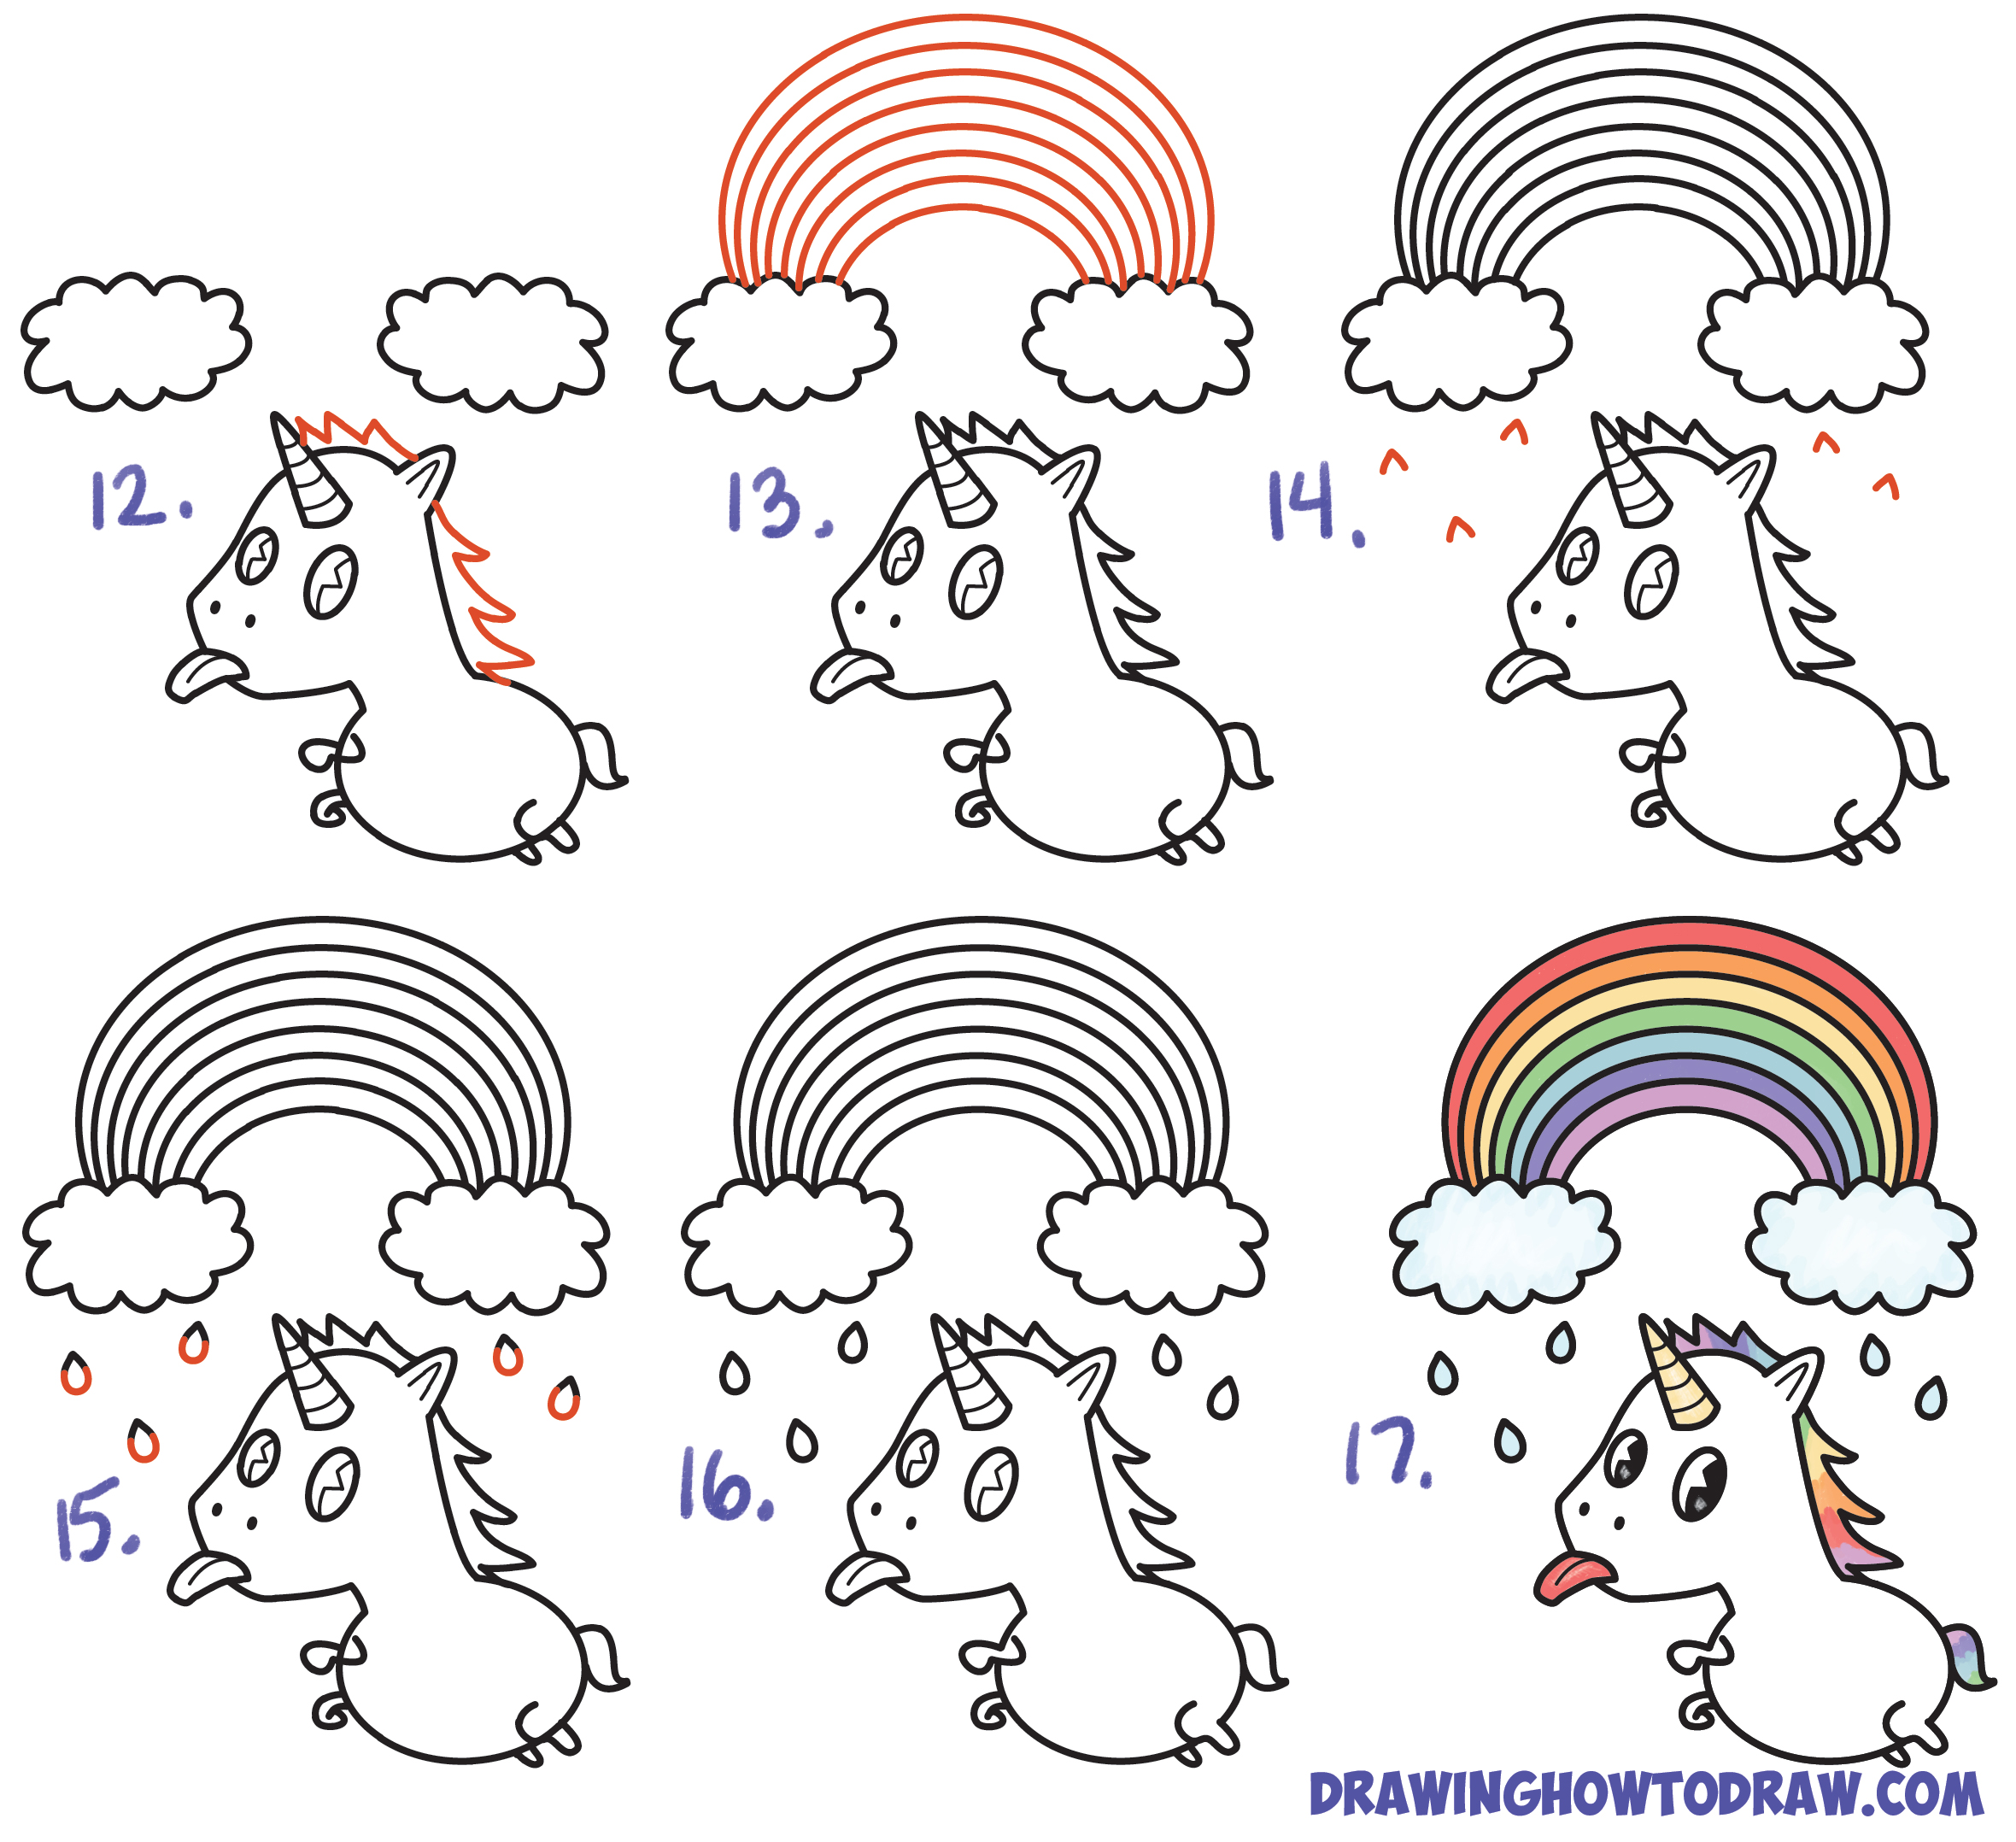 How to Draw a Cute Kawaii Unicorn with Tongue Out Under Rainbow Easy